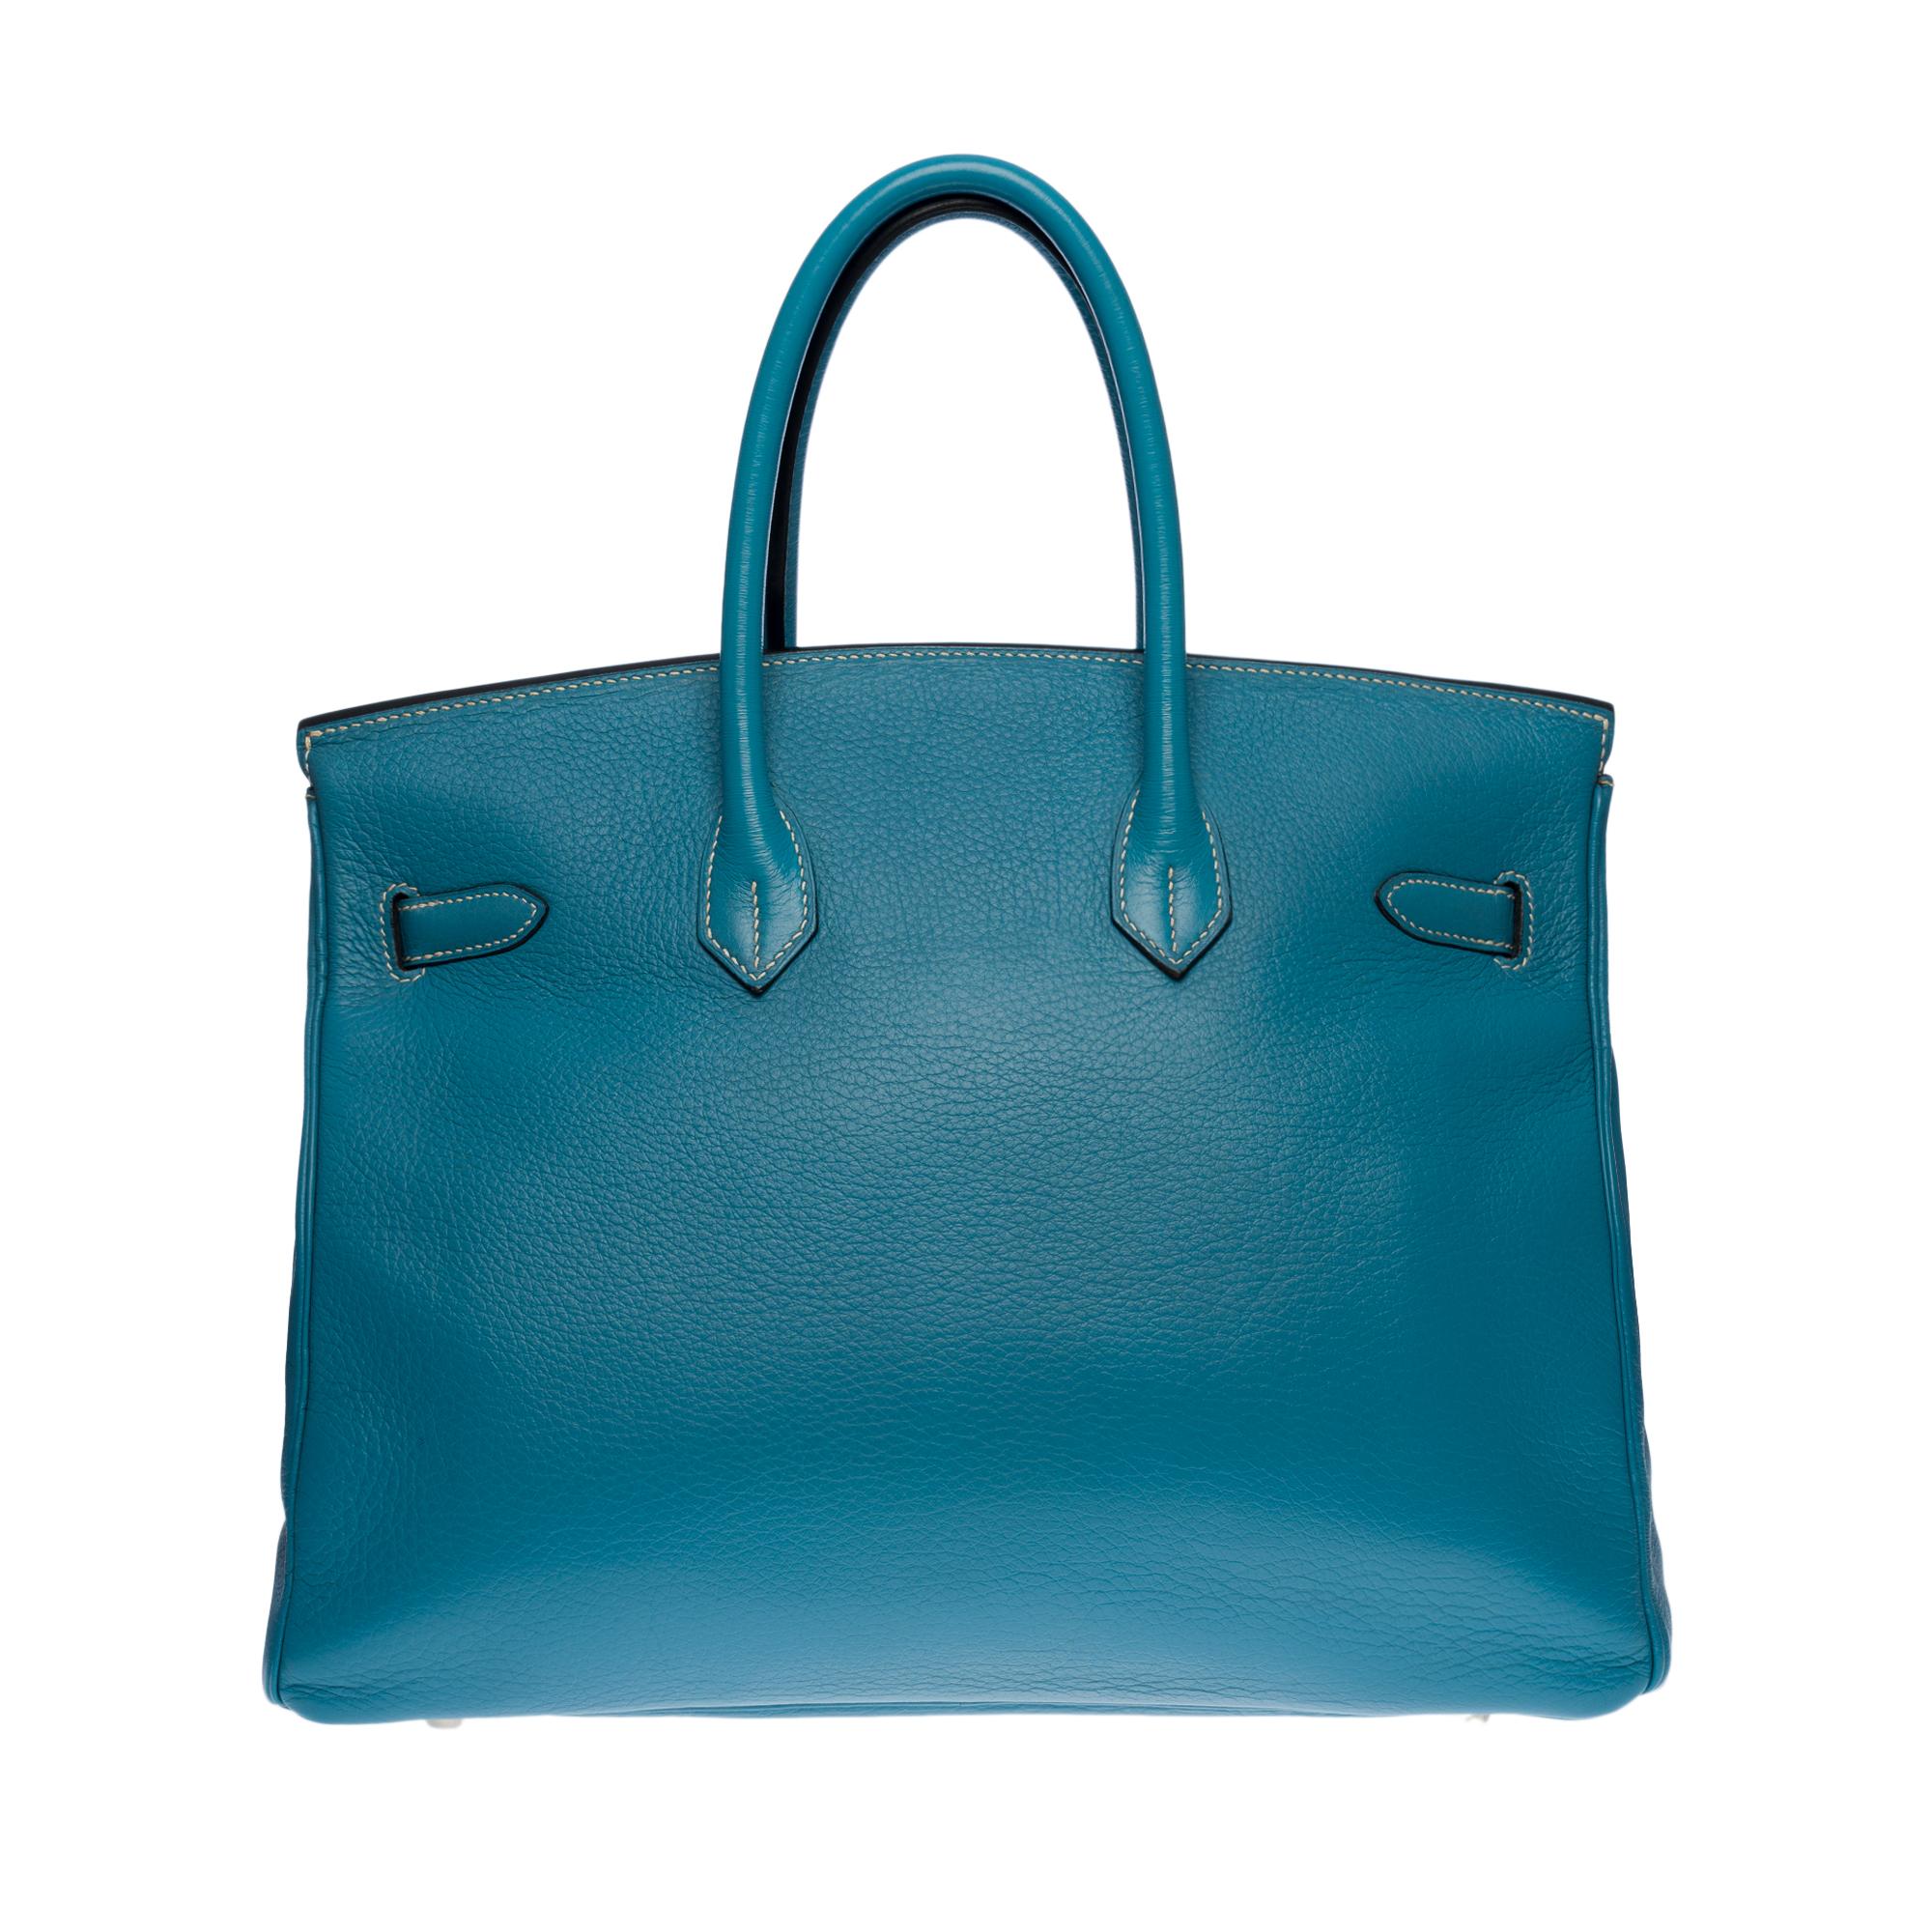 Beautiful Hermes Birkin 40 cm handbag in Blue Jeans Togo leather with White Stitching, Palladium Silver Metal hardware, Double Blue Leather Handle for Hand Wear

Flap closure
Inner lining in blue leather, one zippered pocket, one patch